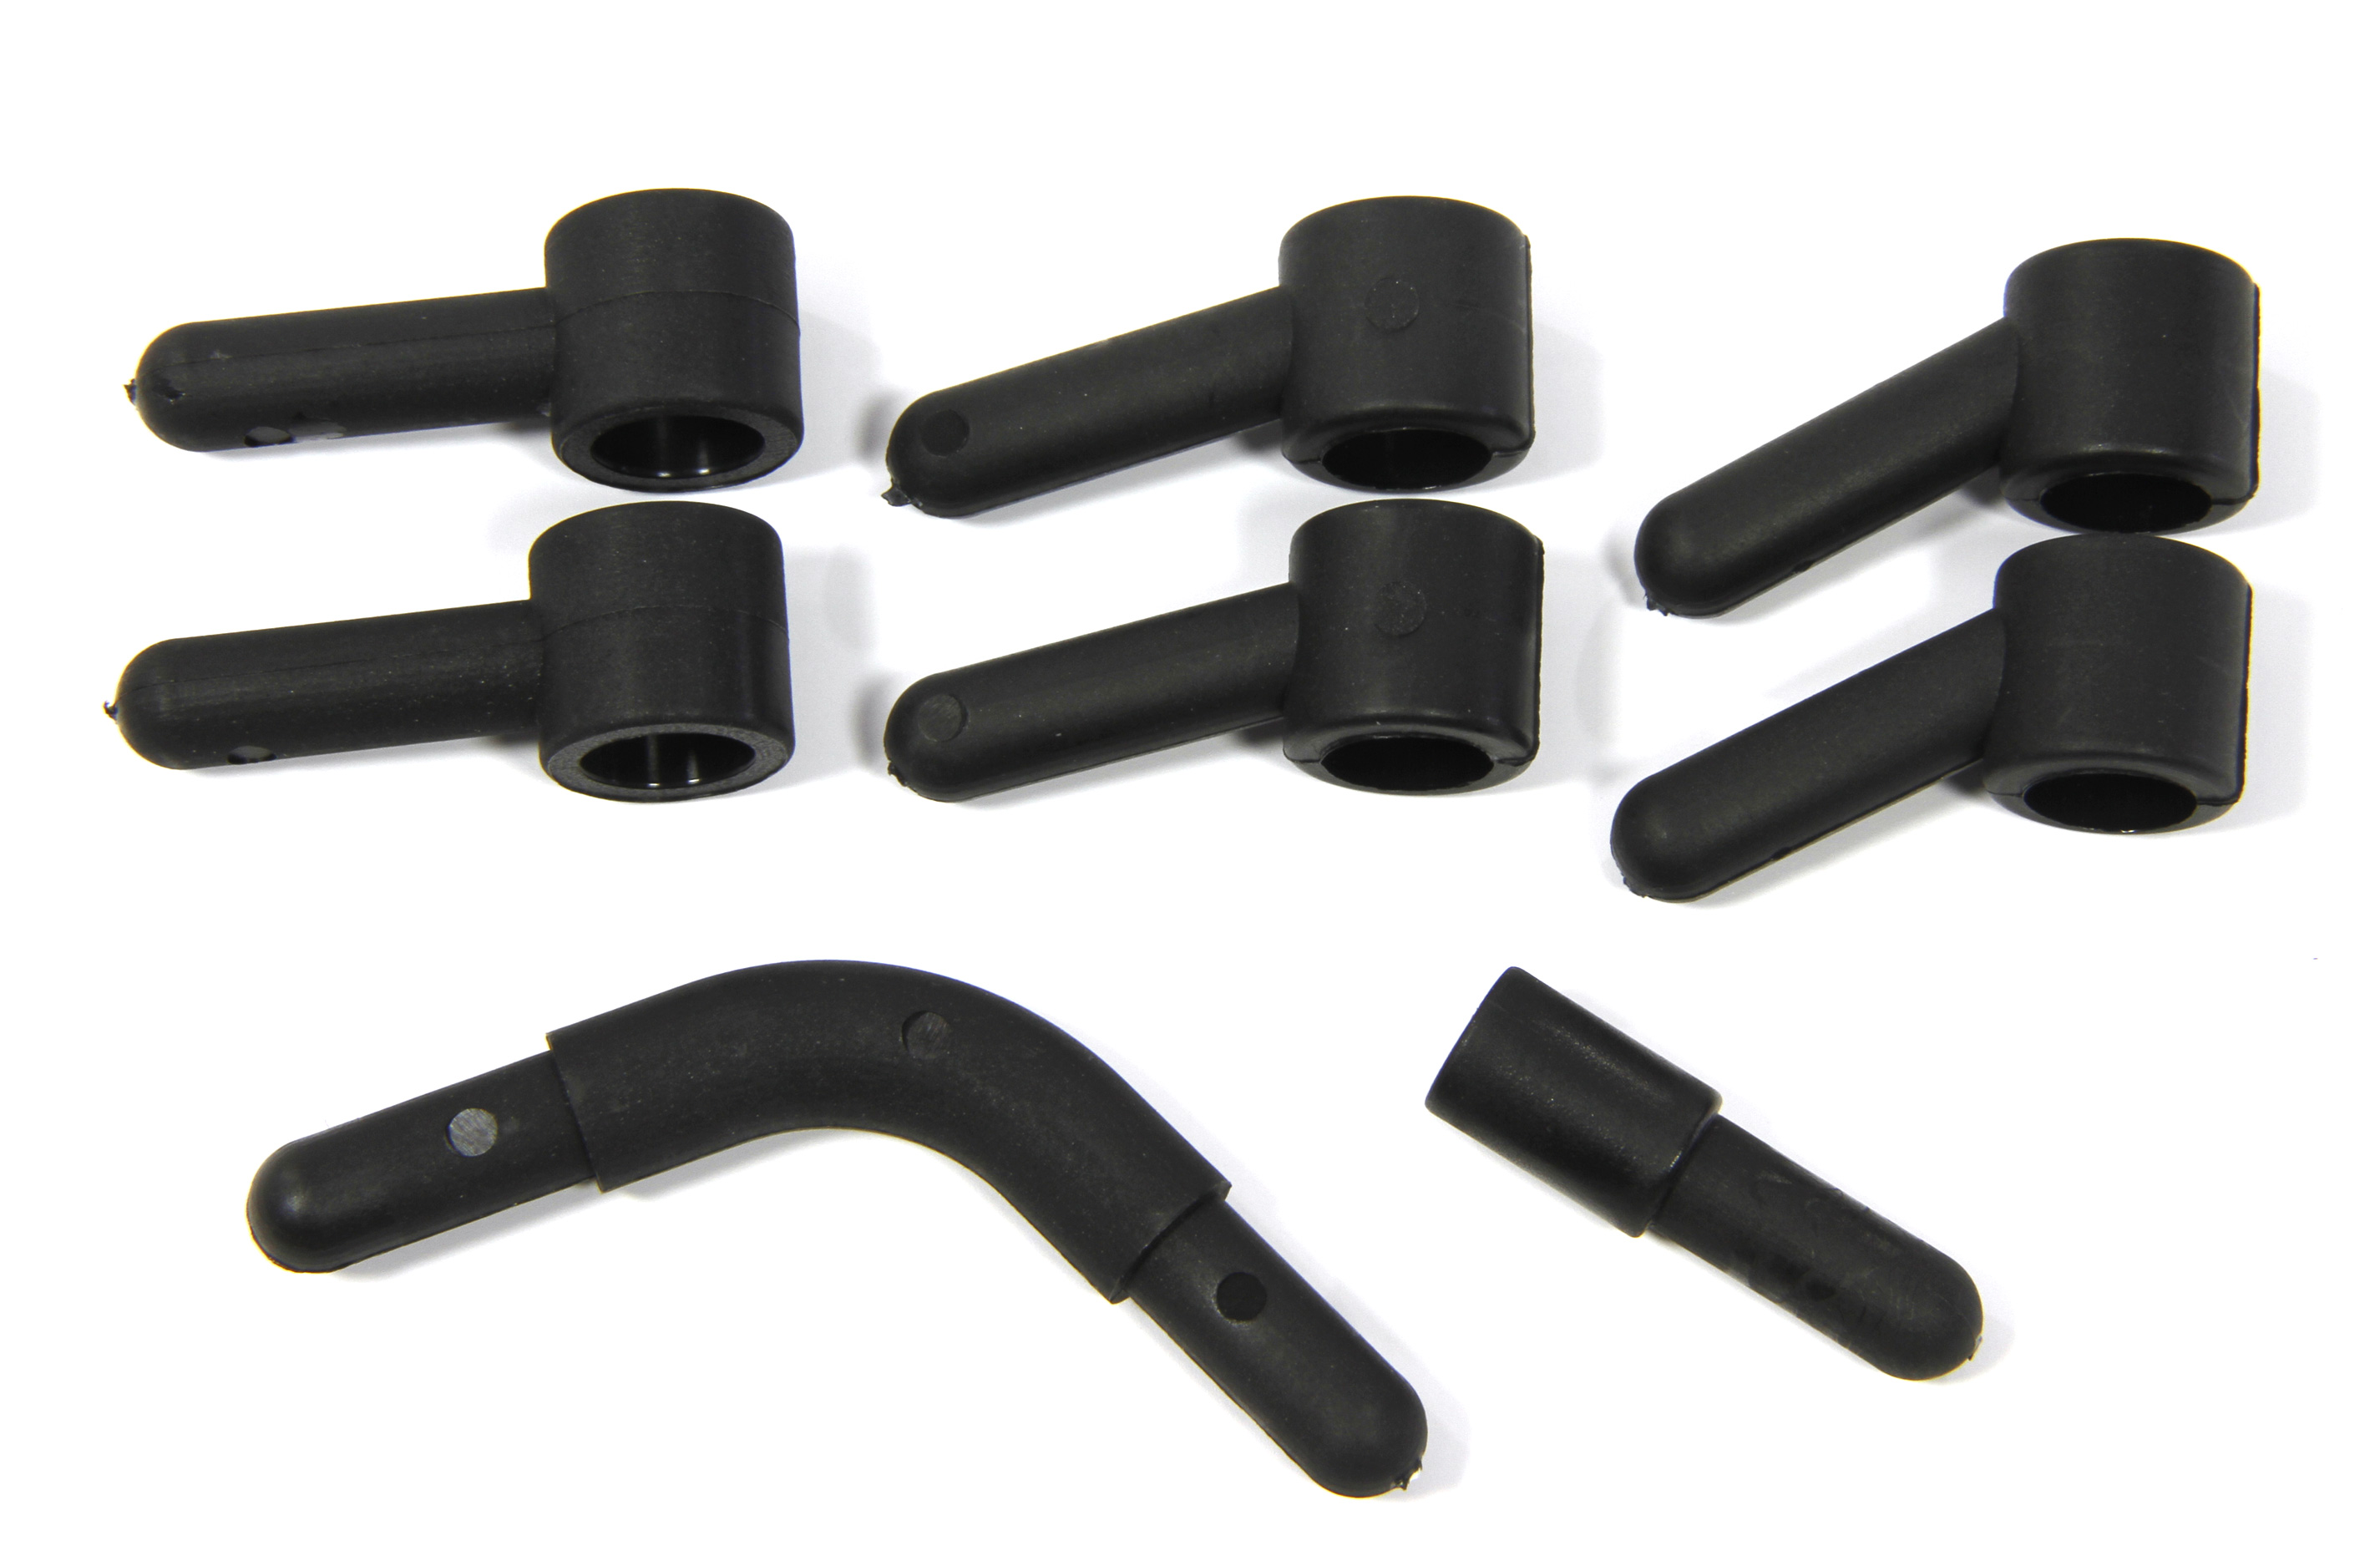 7021 FG Plastic parts roll cage each